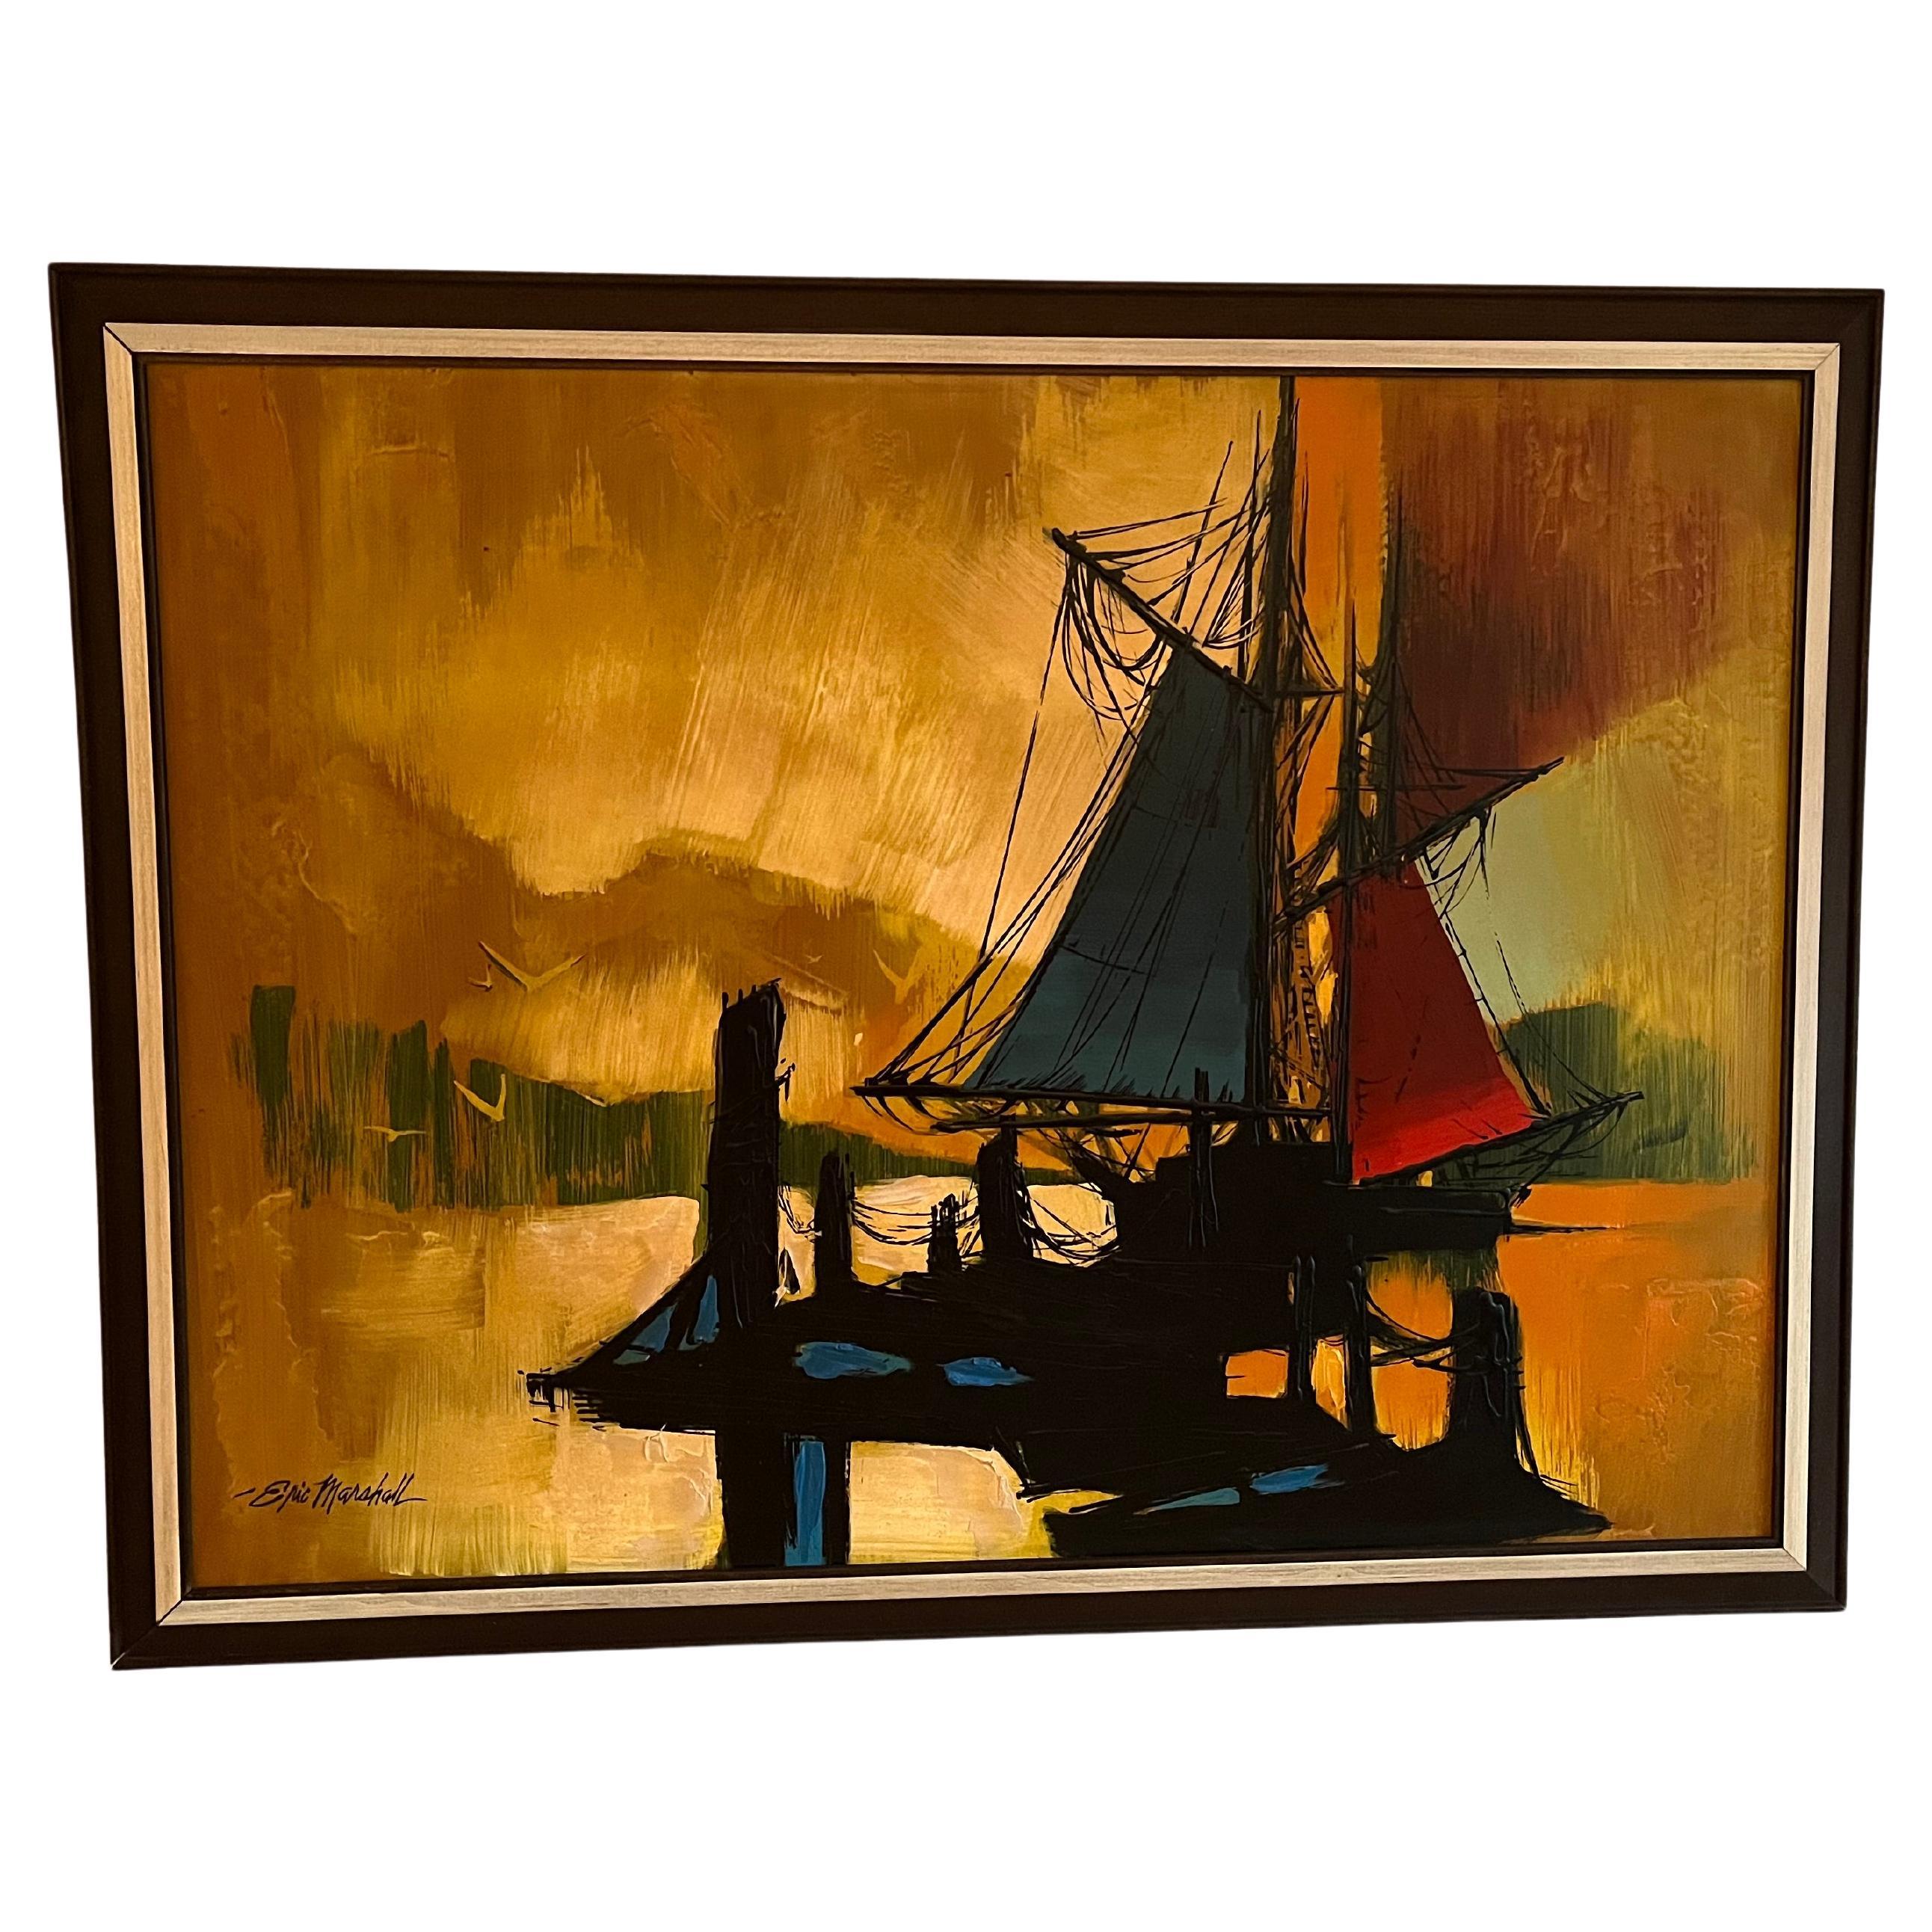 1950-1960 Original Oil Painting of Sail Boat Docked on Lake by Eric Marshall For Sale